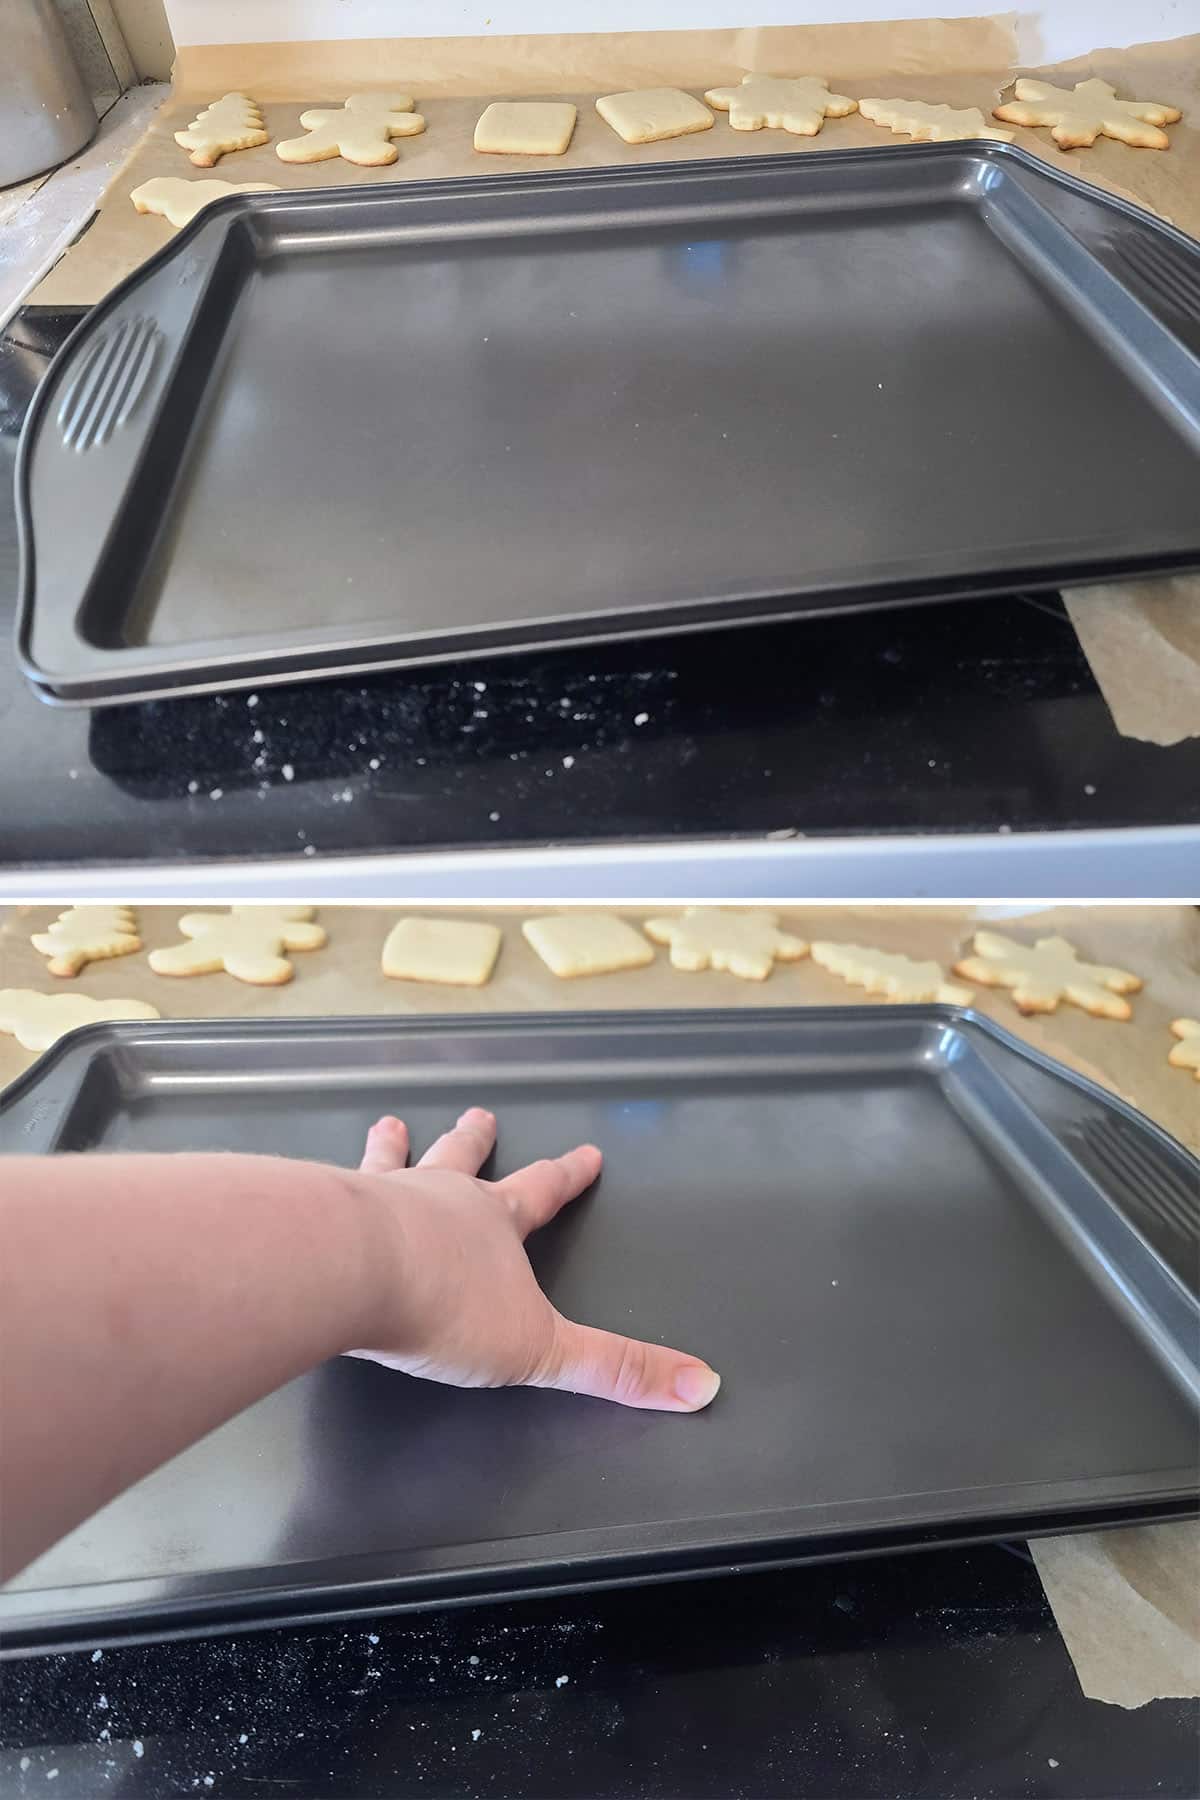 A two part image showing a baking pan being used to flatten a pan of freshly baked sugar cookies.